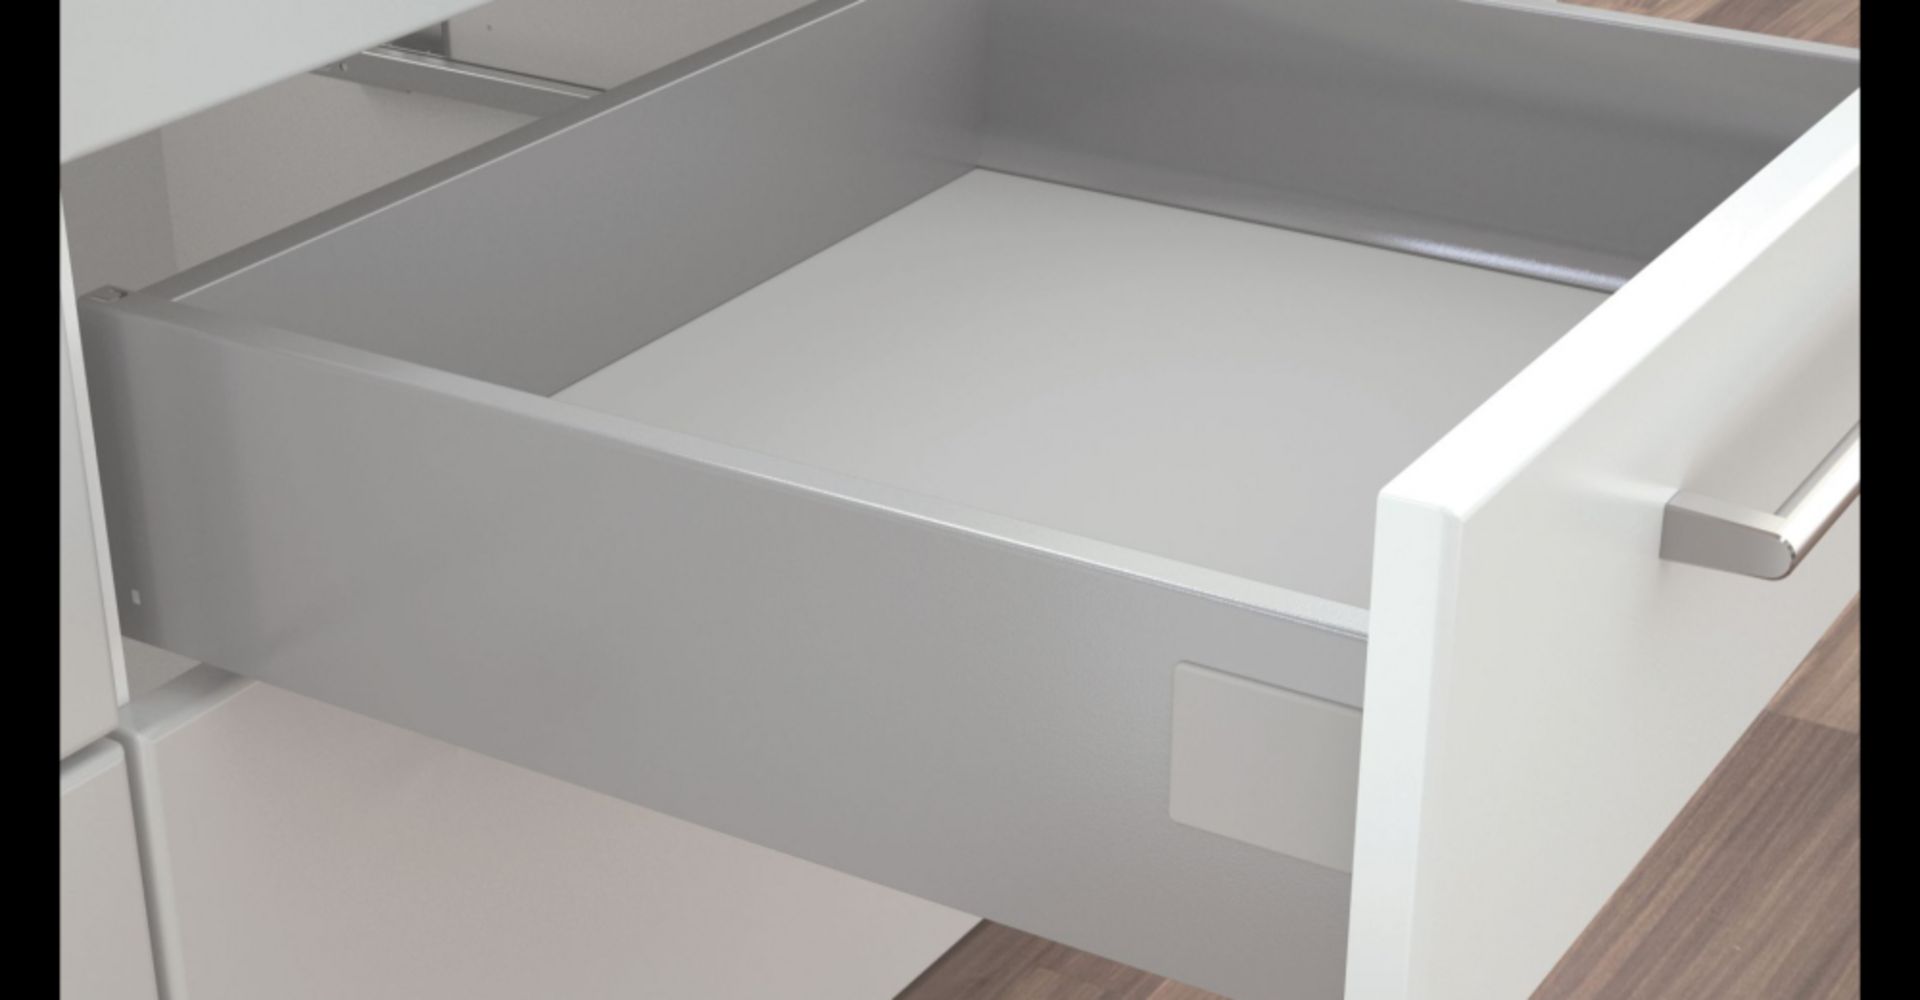 4 x 1000mm Soft Close Kitchen Drawer Packs - B&Q Prestige - Brand New Stock - Features Include Metal - Image 4 of 5